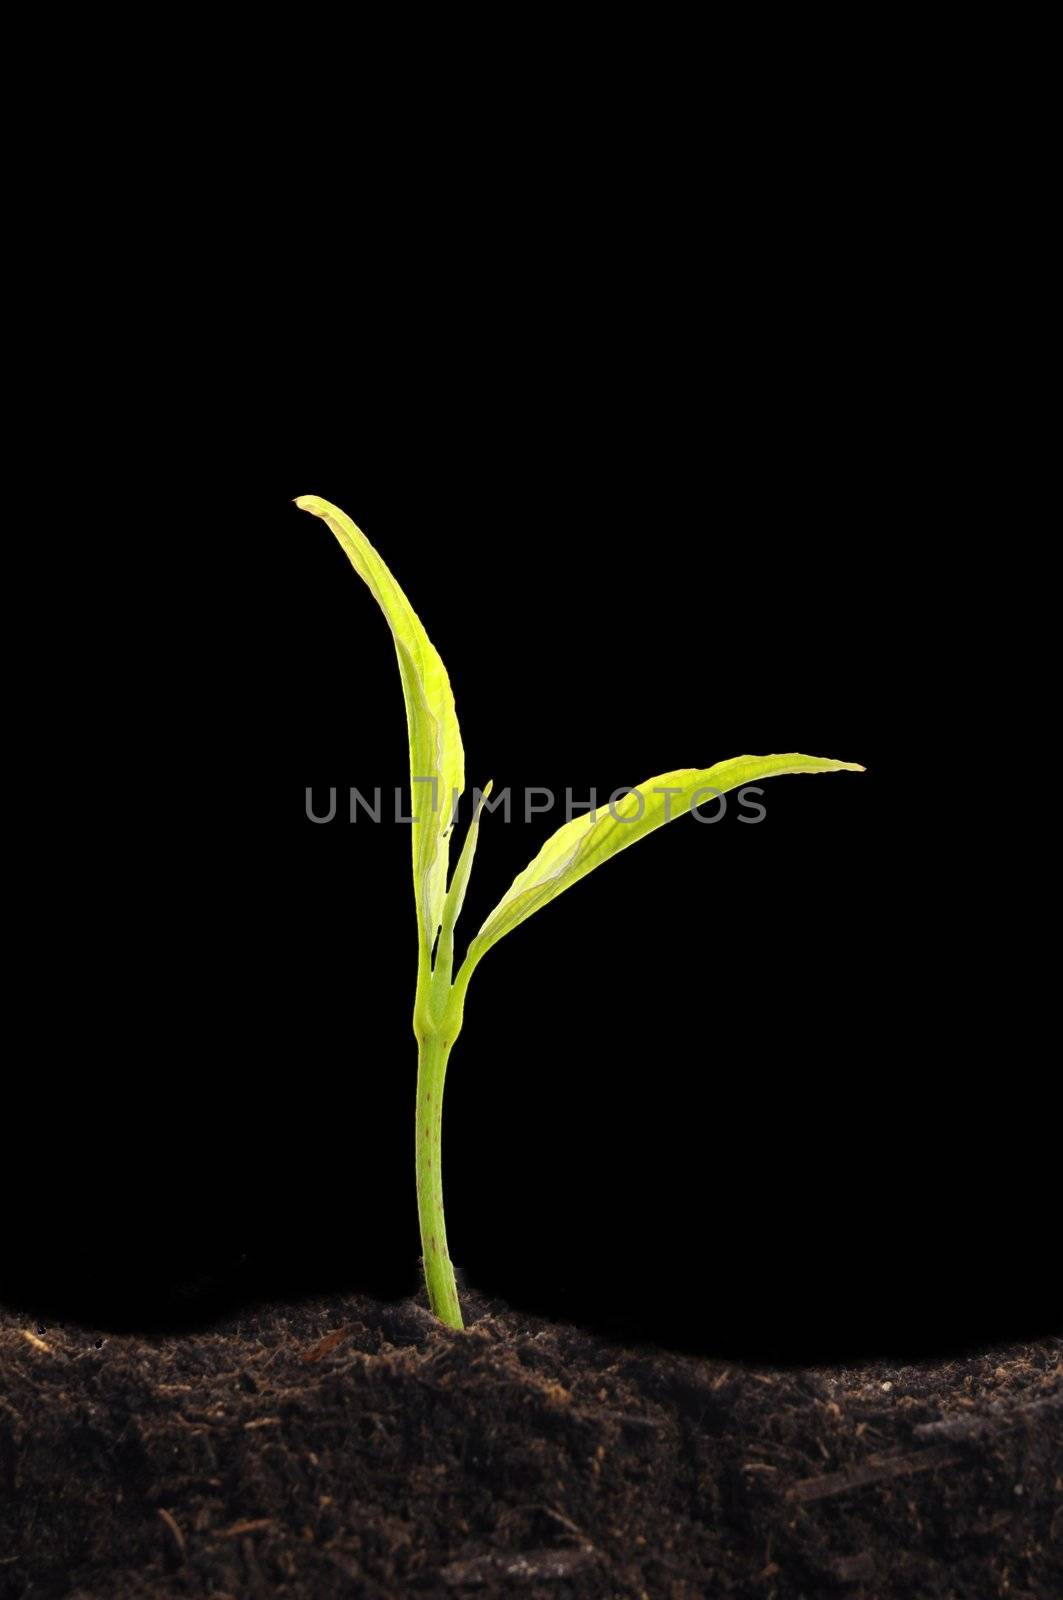 growth or new life concept with small plant sun and copyspace